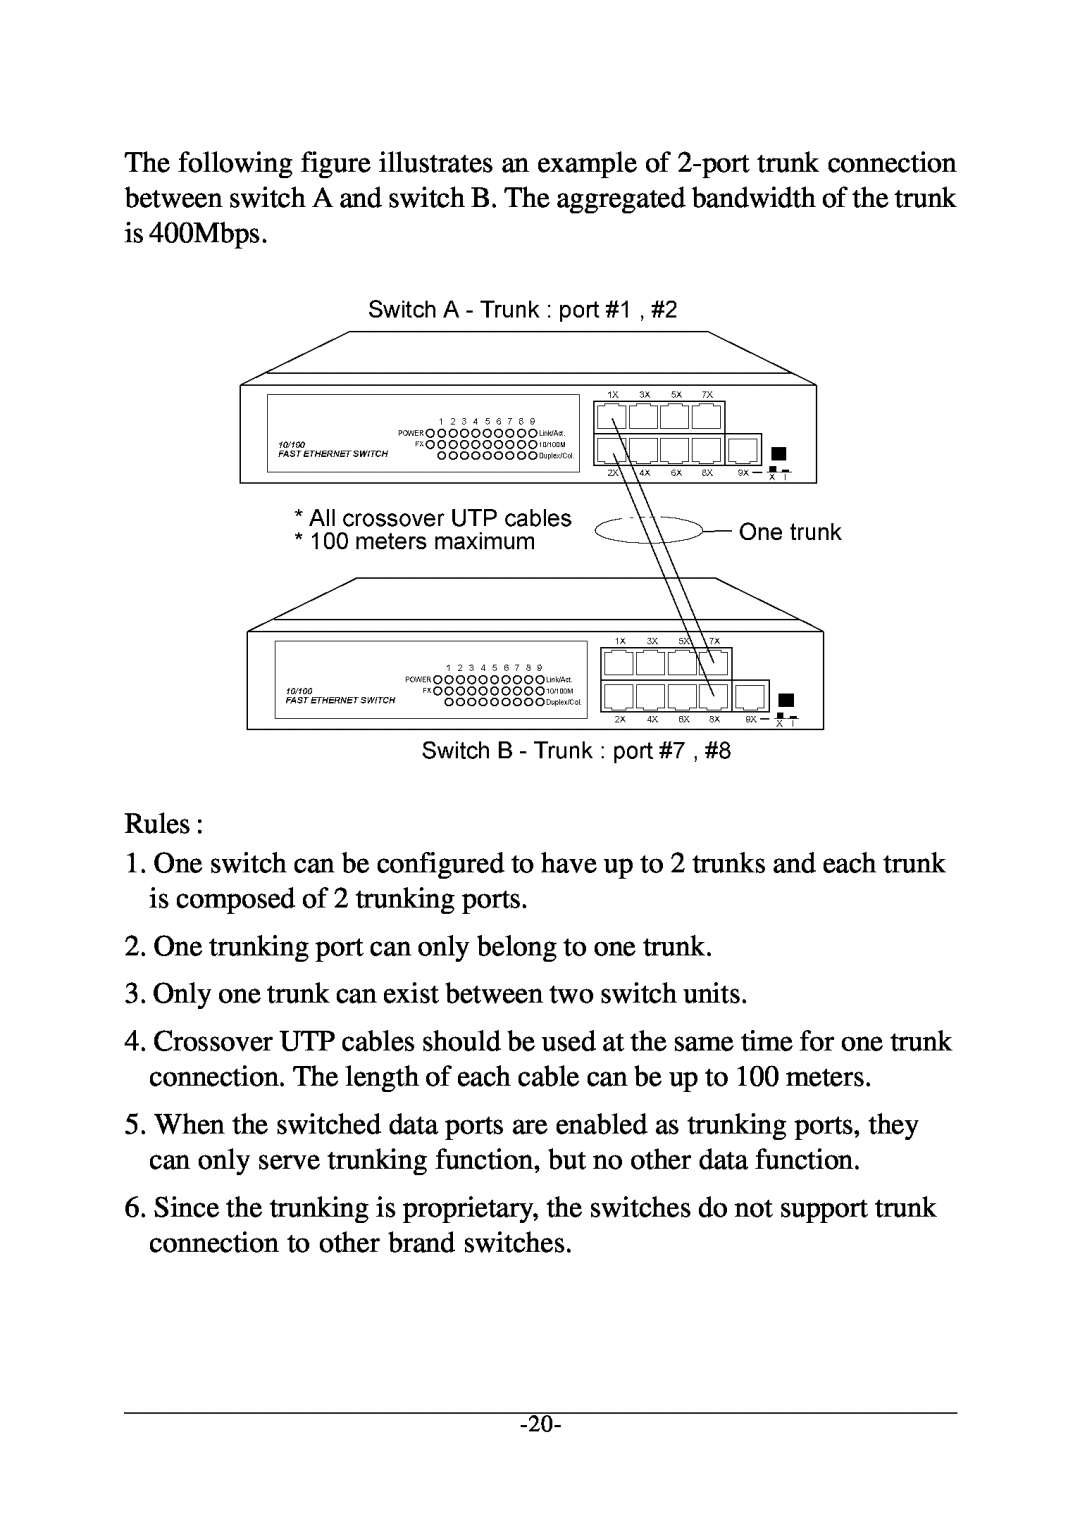 Xerox KS-801 Rules, One trunking port can only belong to one trunk, Only one trunk can exist between two switch units 